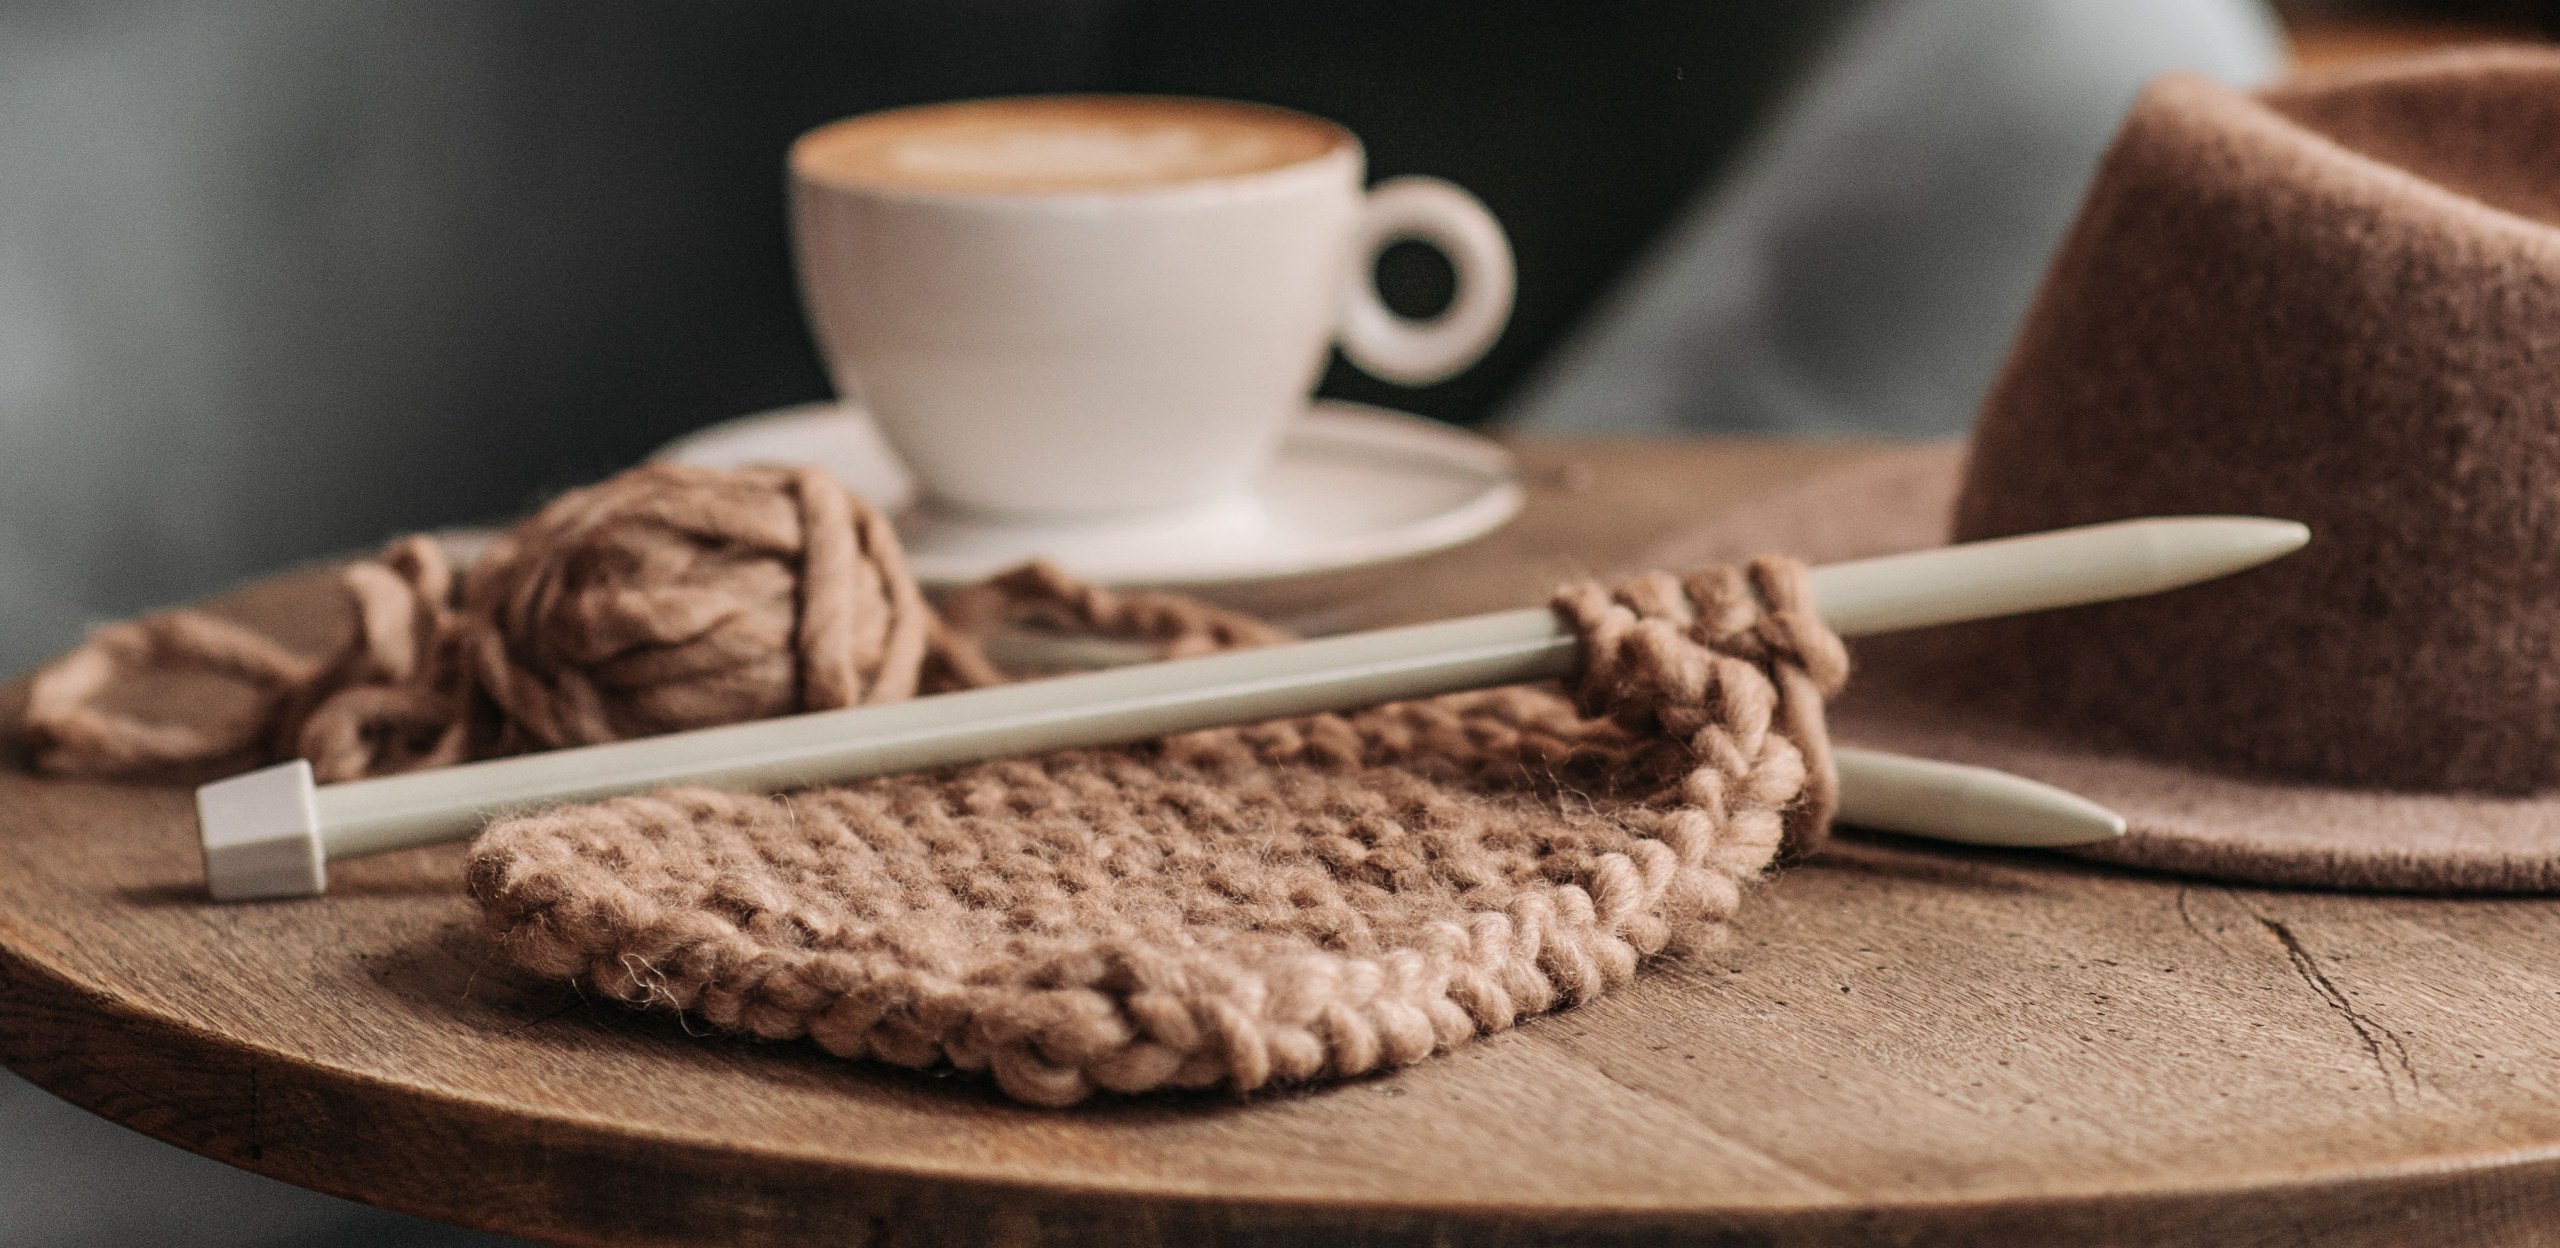 How To Knit for Beginners: Part Two